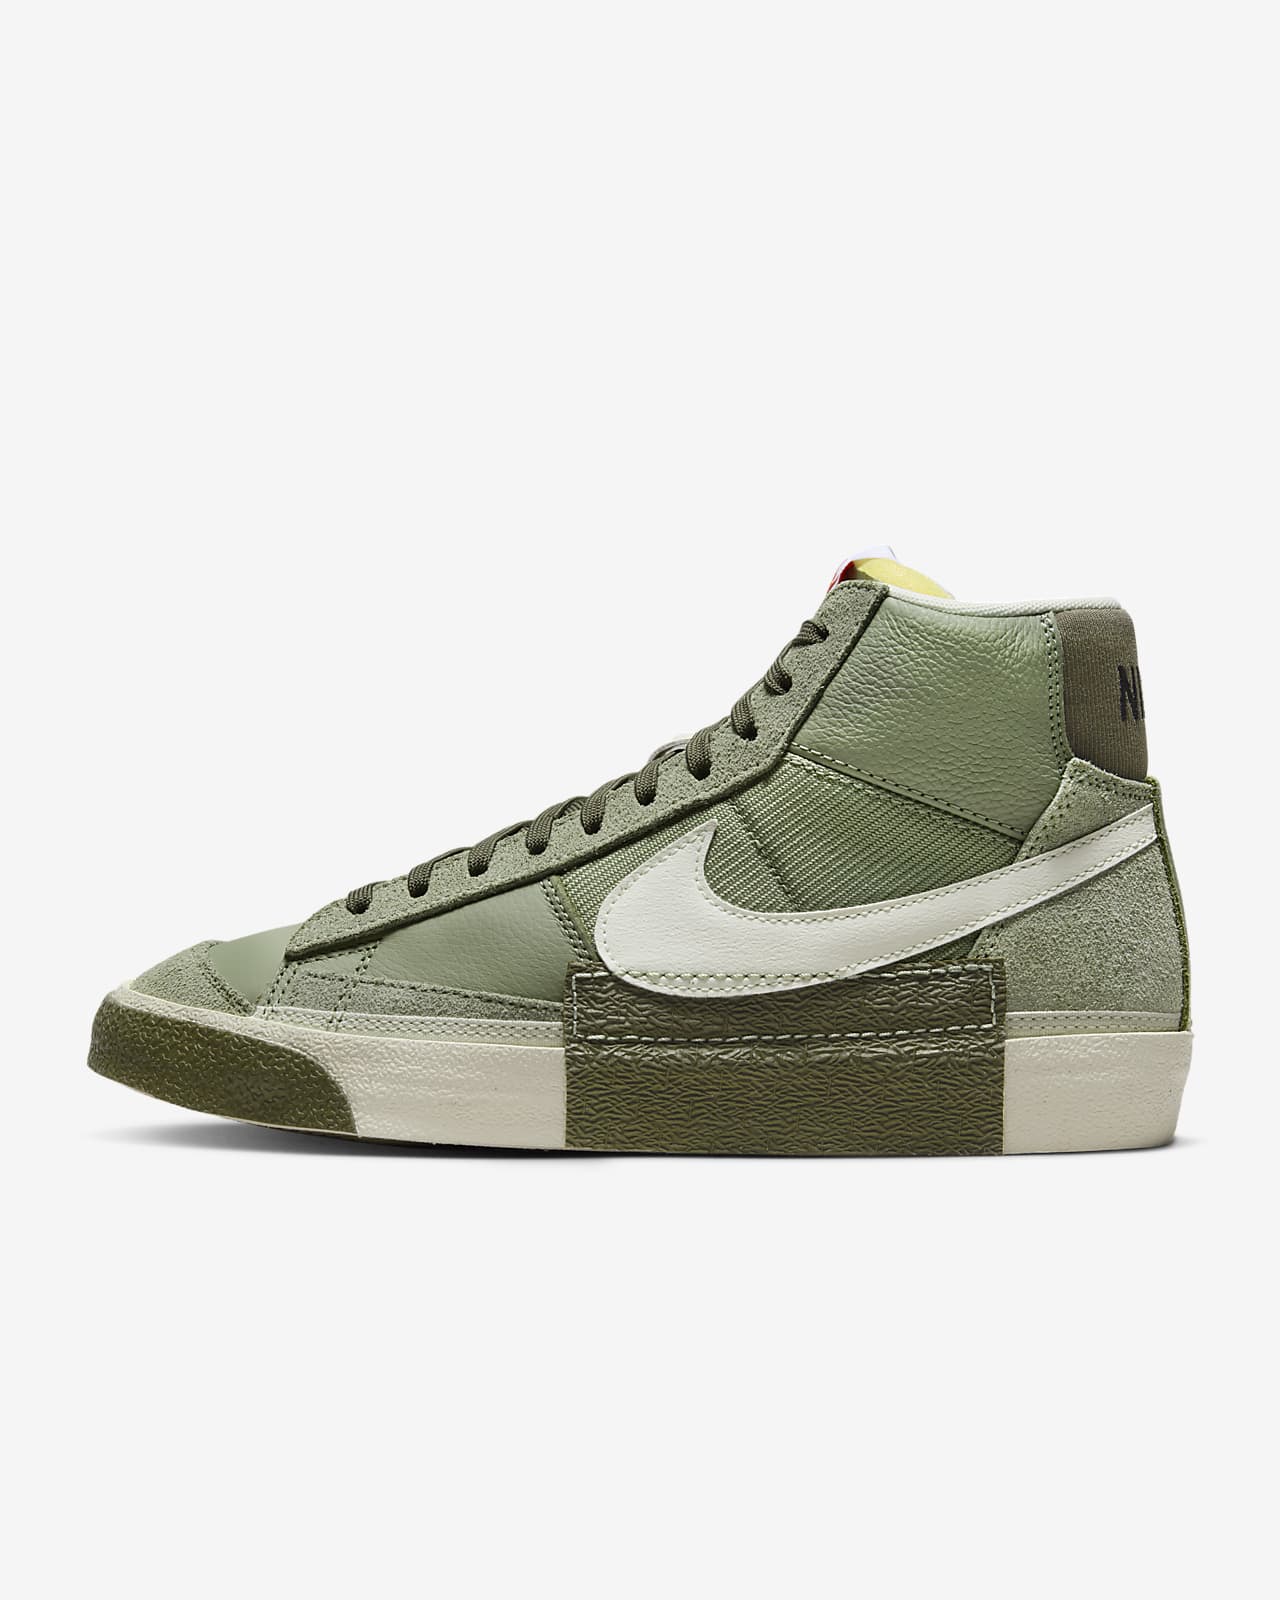 Is This the Ultimate Sneaker Game-Changer? Nike Blazer Mid Pro Club Men ...